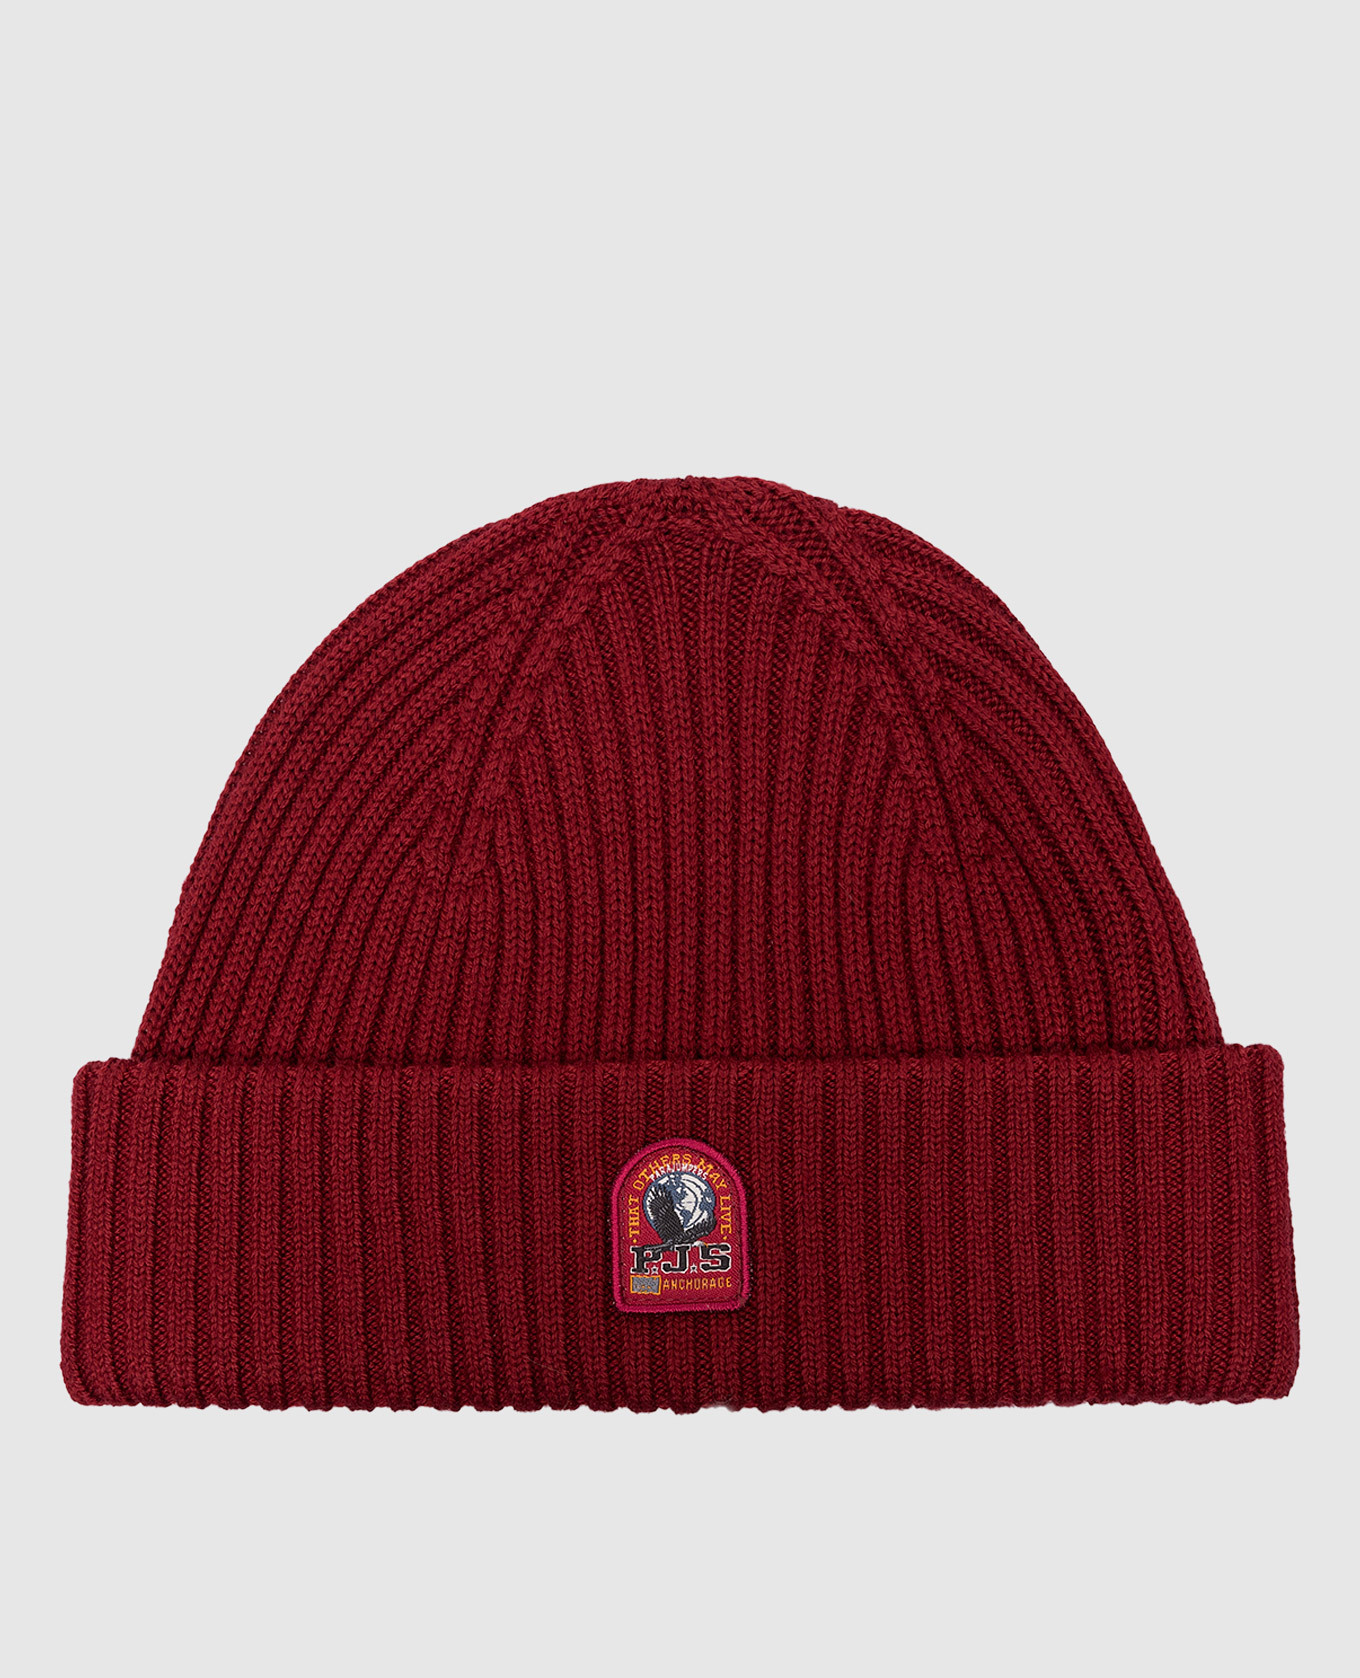 Red Rib Hat with logo patch